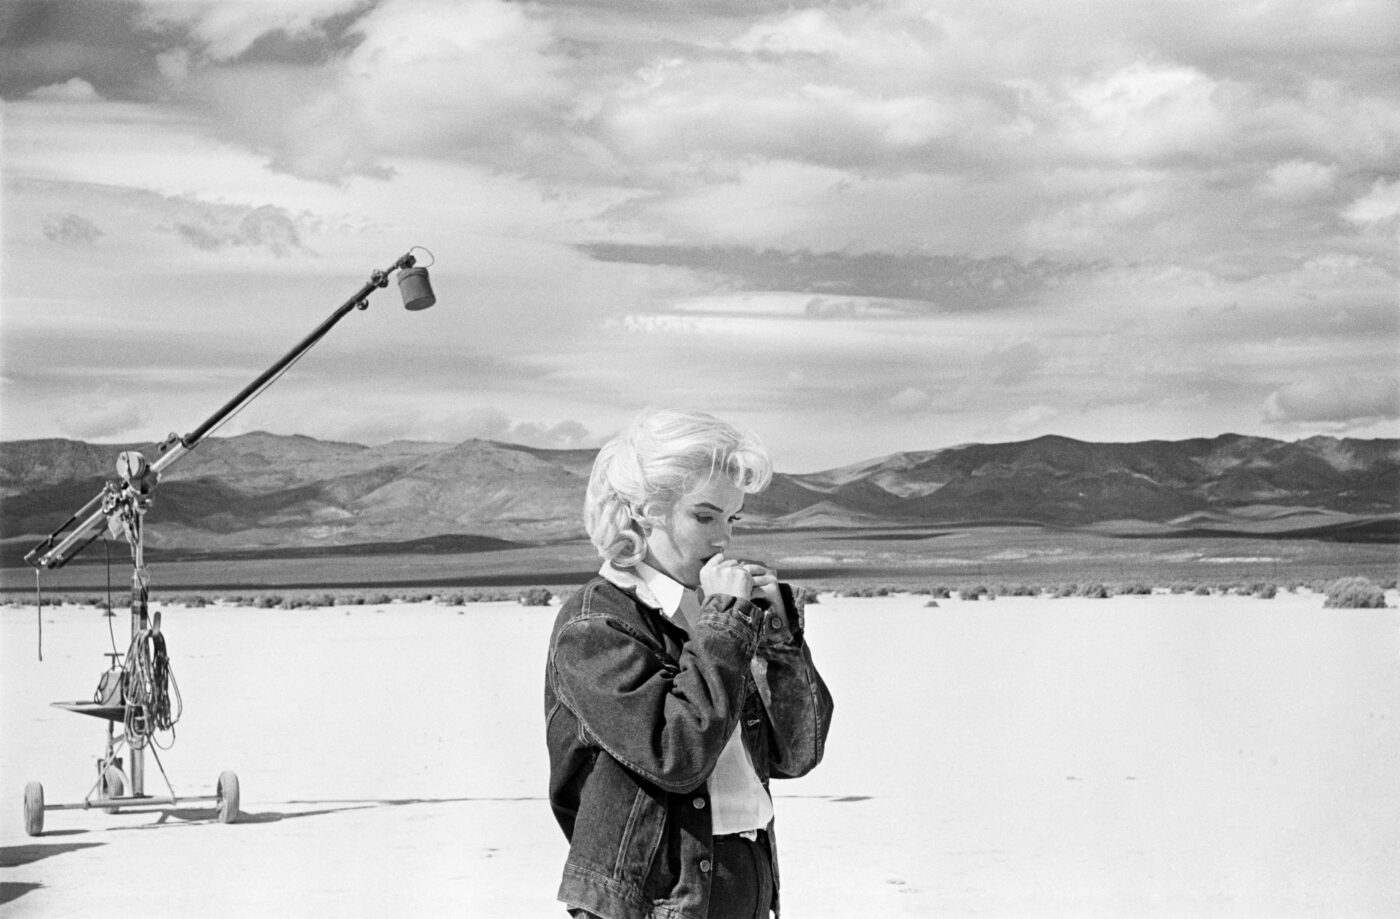 Eve Arnold, Marilyn Monroe going over her lines for a difficult scene she is about to play with Clarke Gable in the film „The Misfits“, Reno, Nevada, 1960, © Eve Arnold/Magnum Photos